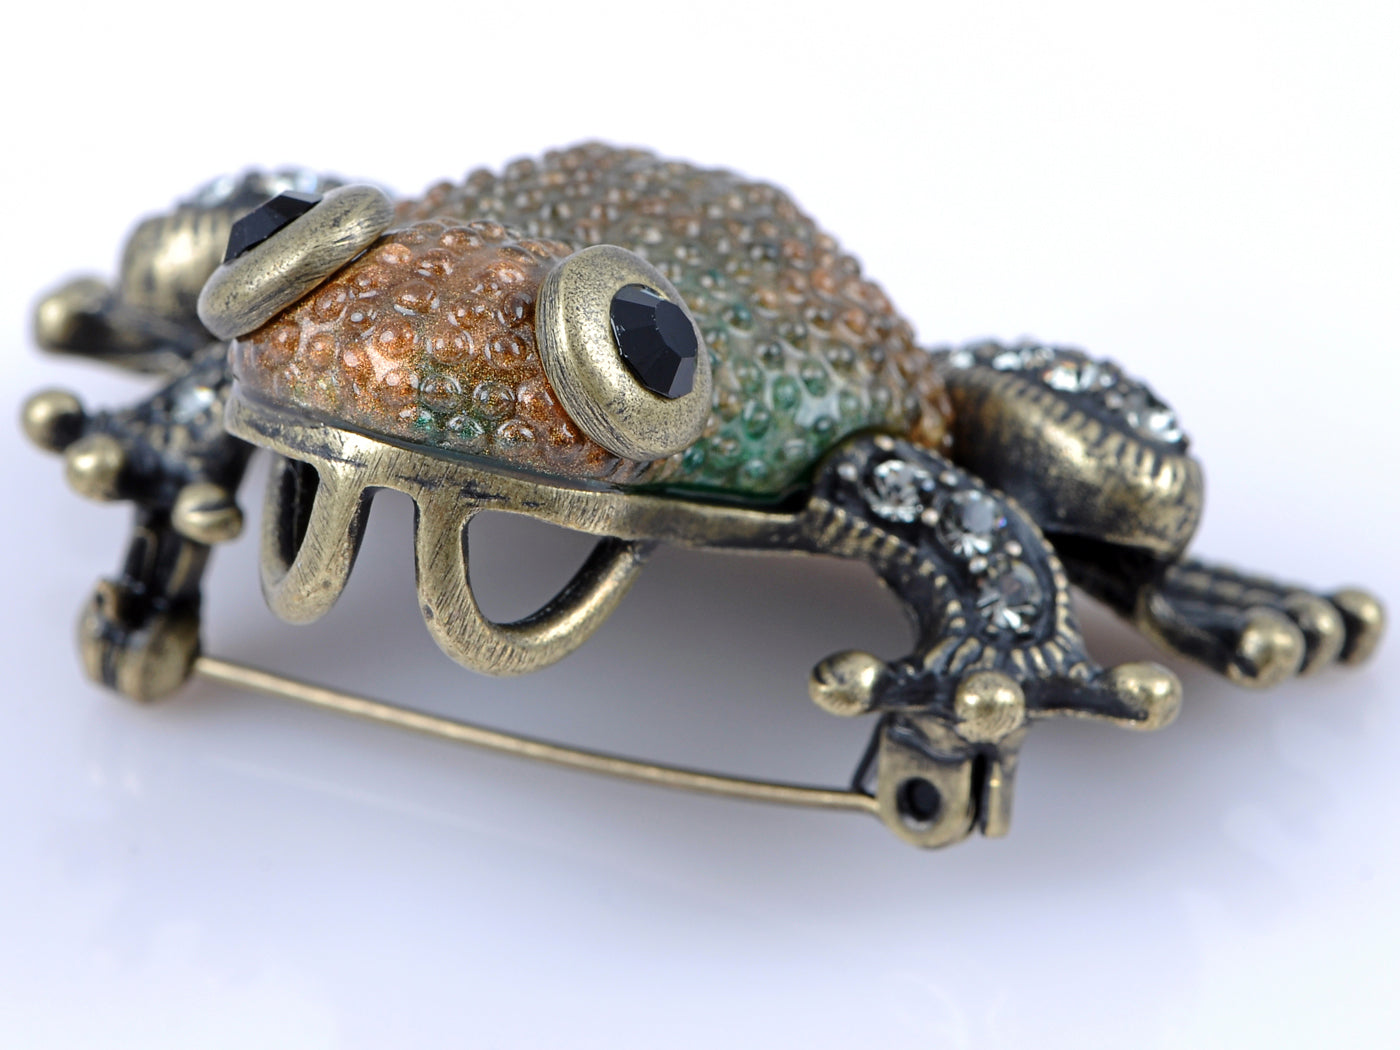 Elements Antique Bumpy Skin Brown Frog Pin Brooch